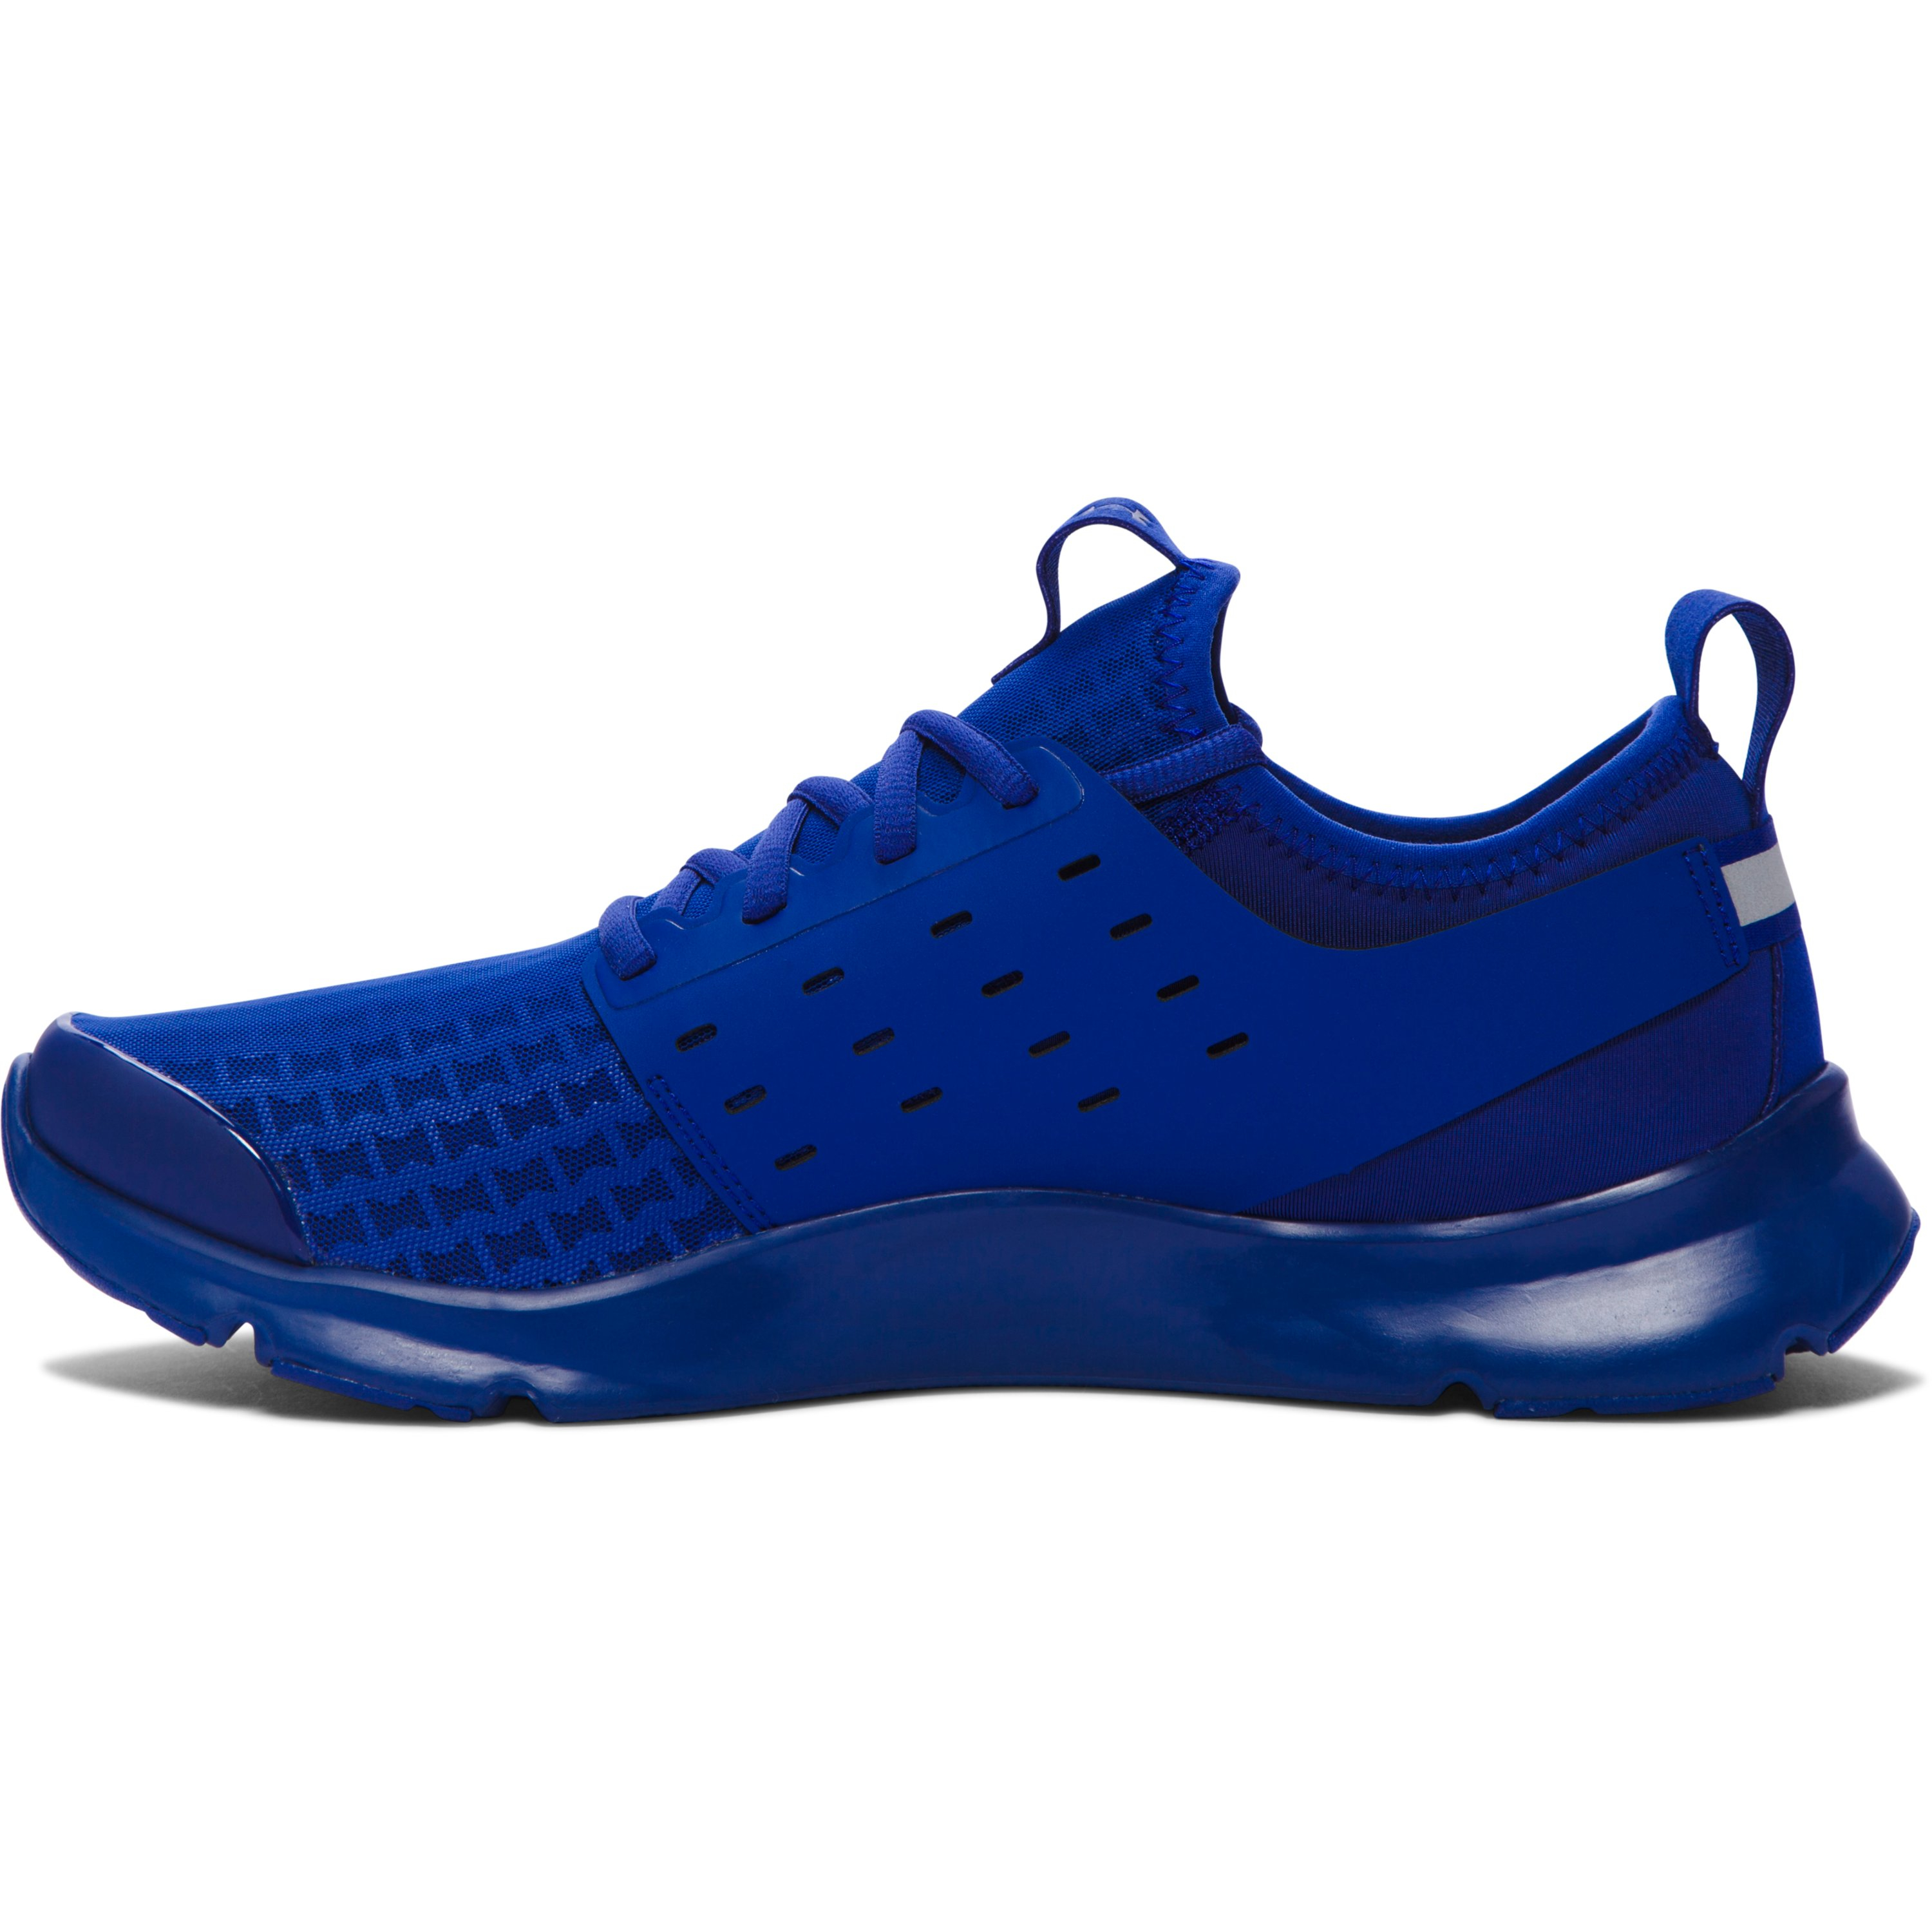 Under Armour Synthetic Men's Ua Drift Running Shoes in Blue for Men - Lyst